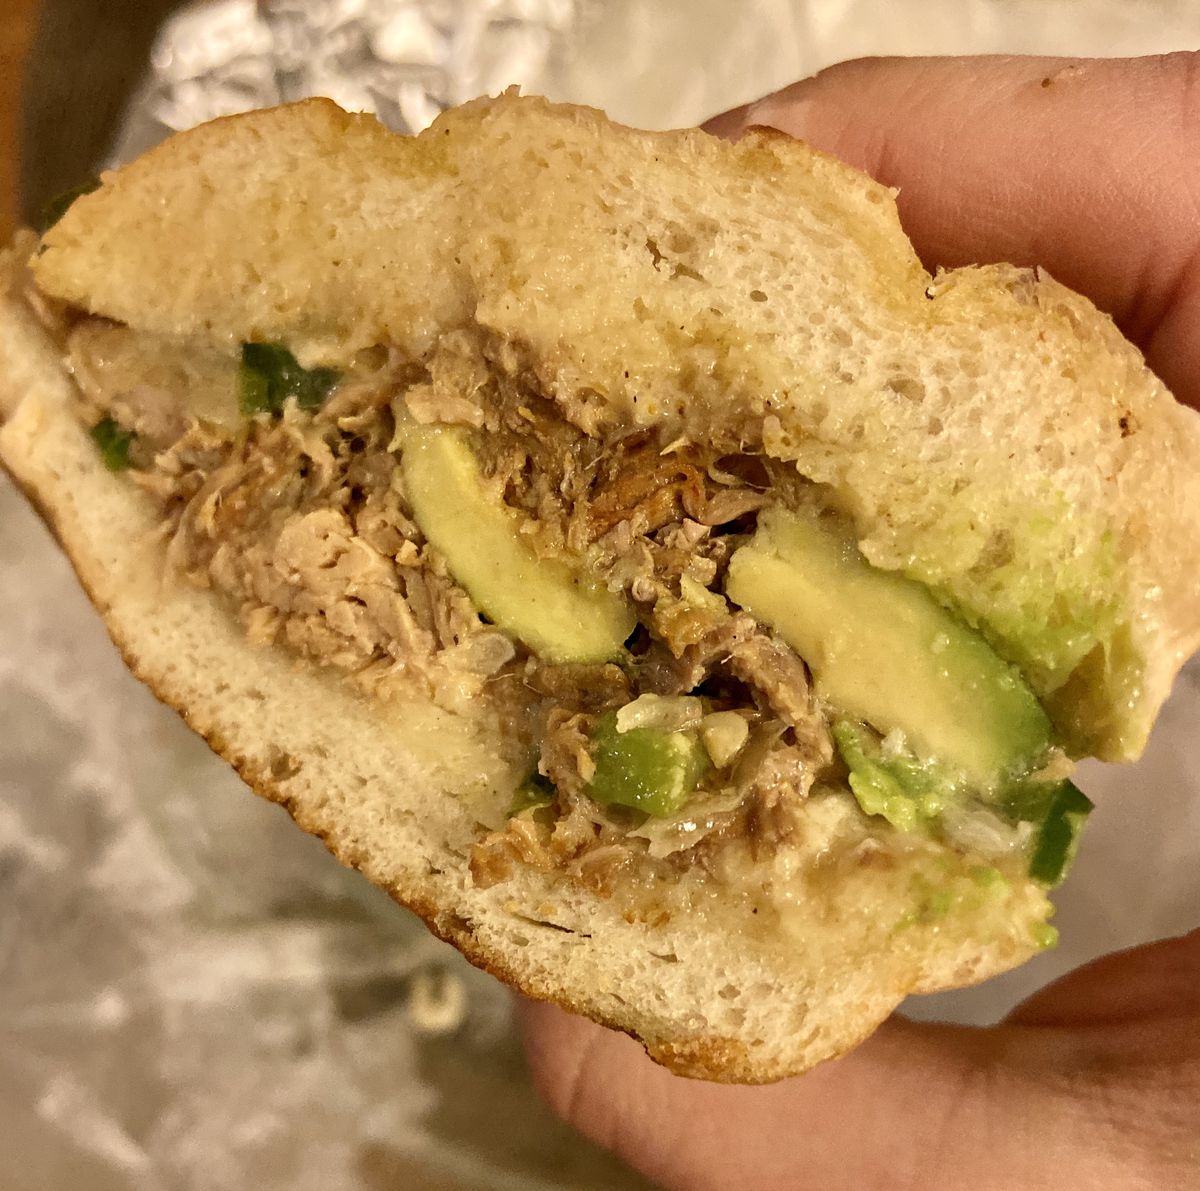 A Costa Rican sandwich of pulled pork, garlic aioli, jalapenos, caramelized onions, and avocado.